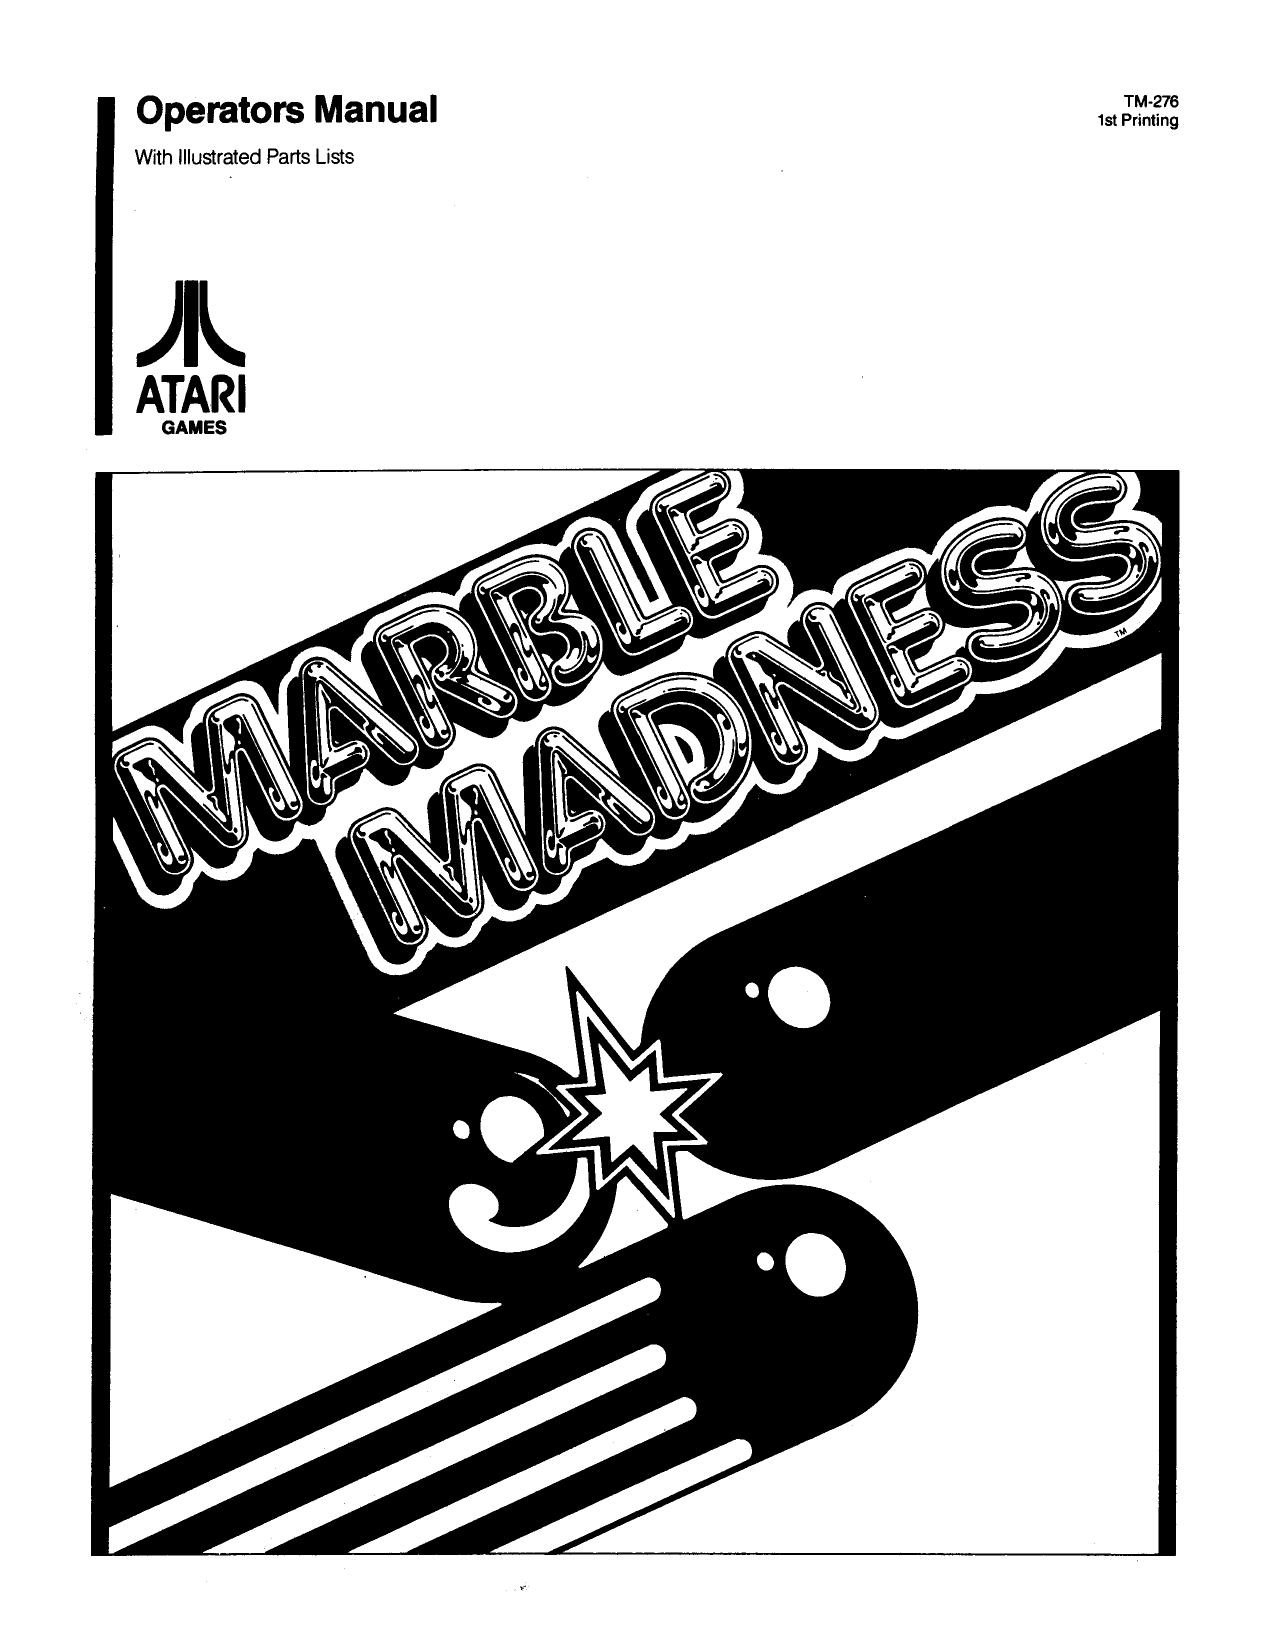 Marble Madness TM-276 1st Printing